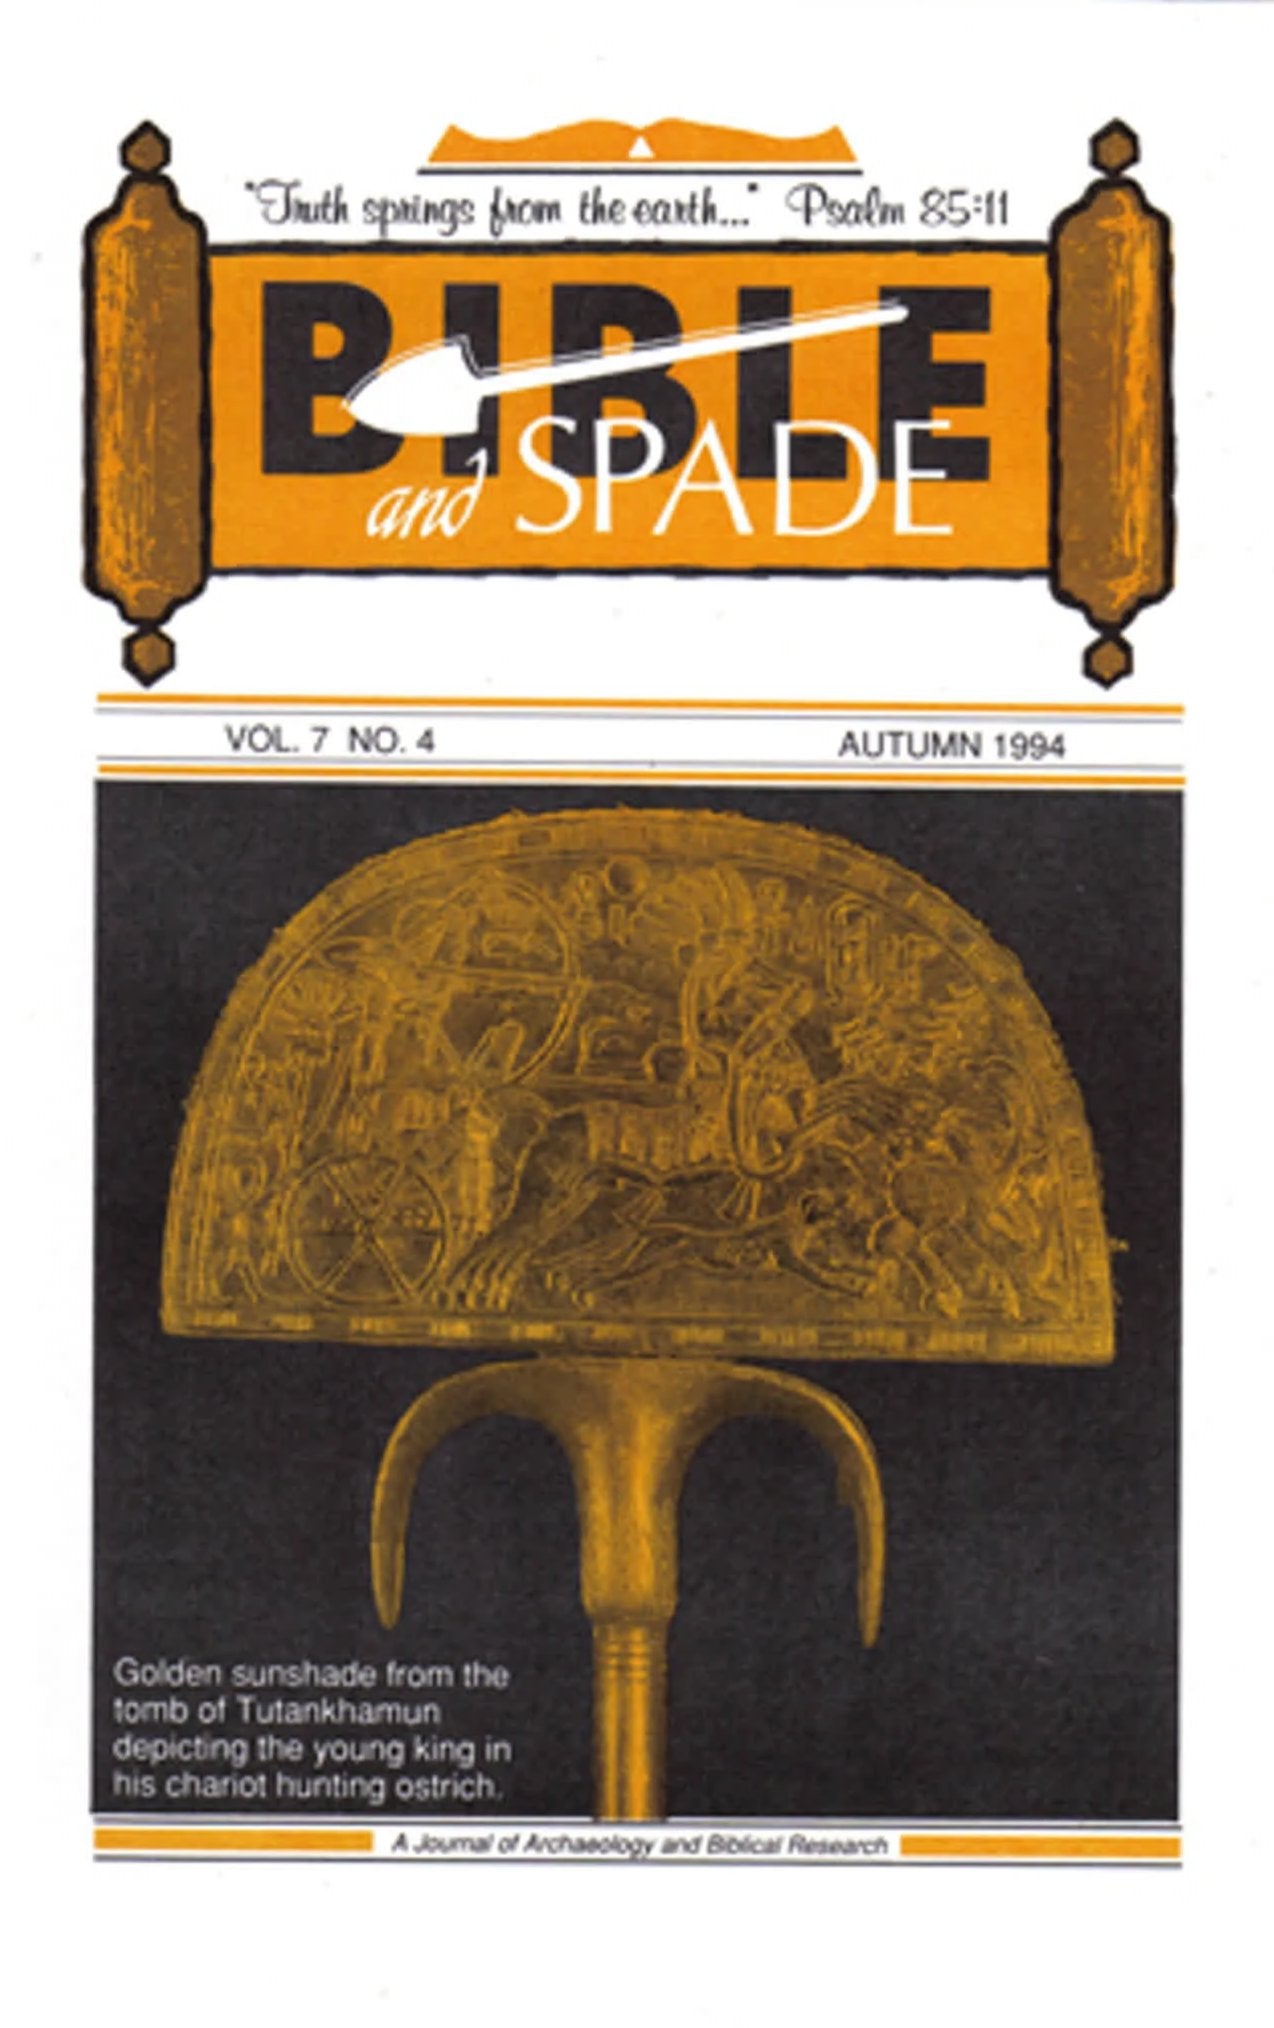 Four issues of BIBLE and SPADE produced in 1994